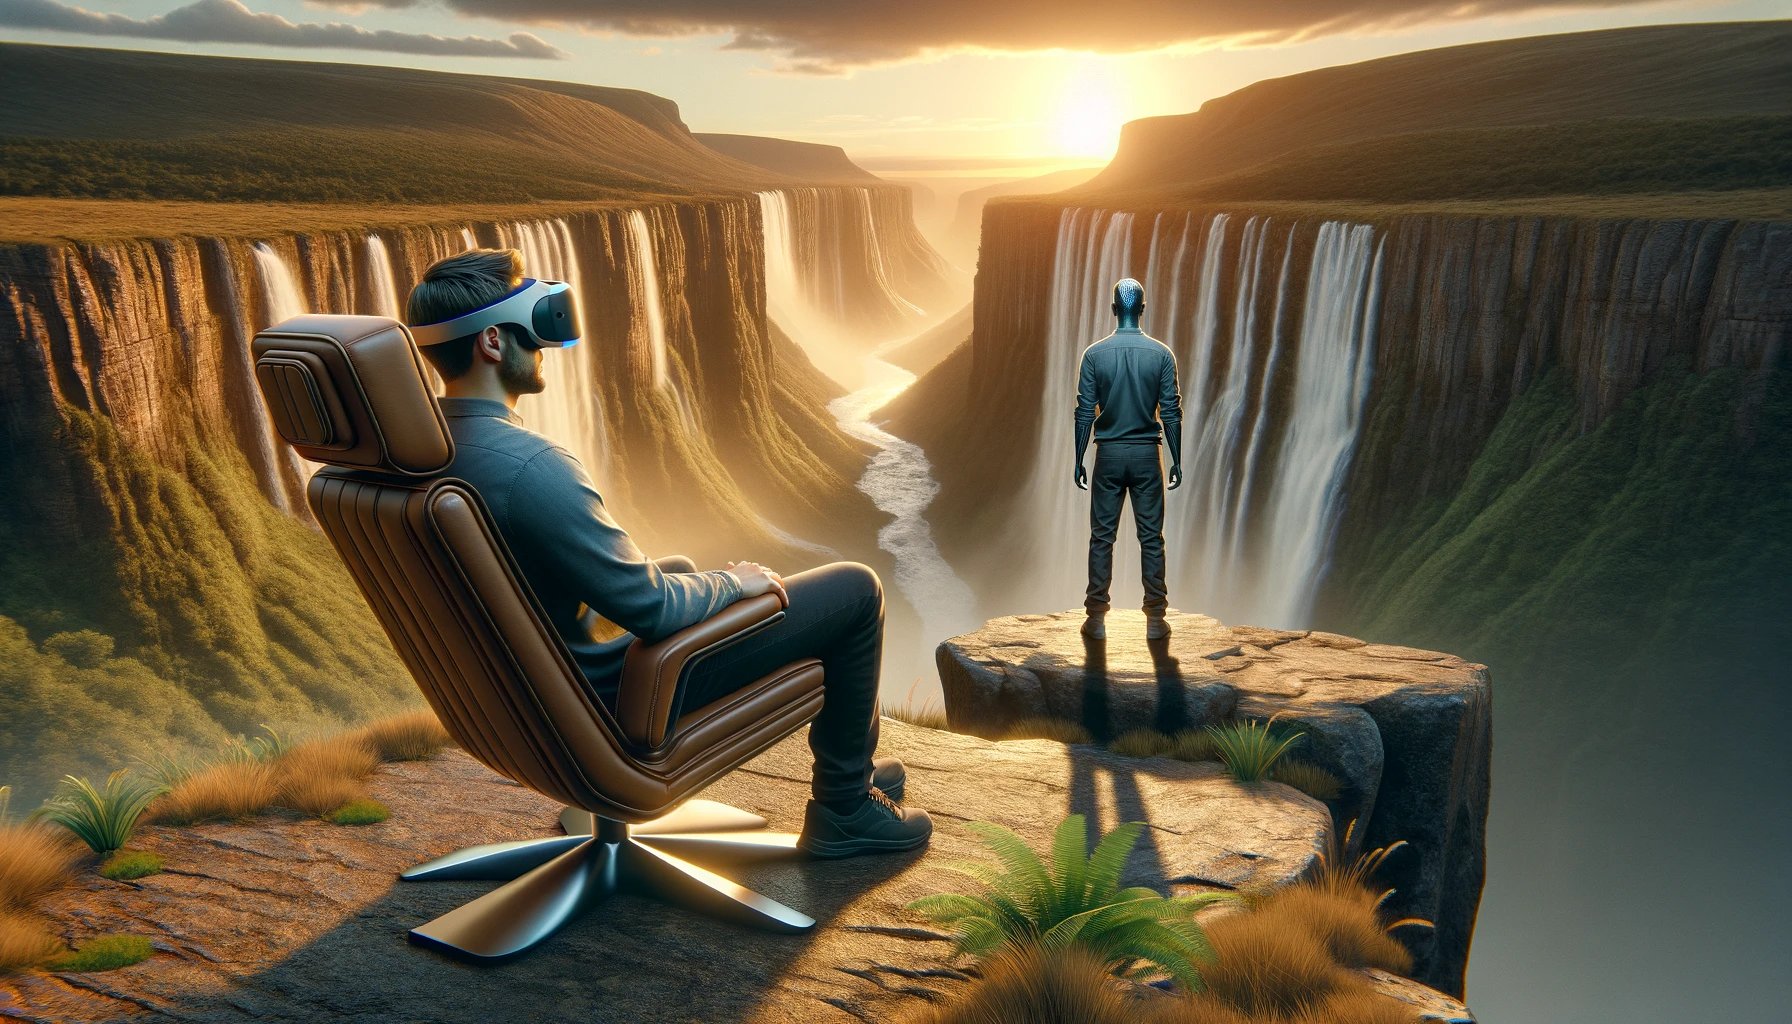 DALL·E 2024-03-02 12.44.52 - Create a hyper-realistic image of a male therapist sitting comfortably in a high-end relaxation chair perched on the edge of a cliff with a spectacula